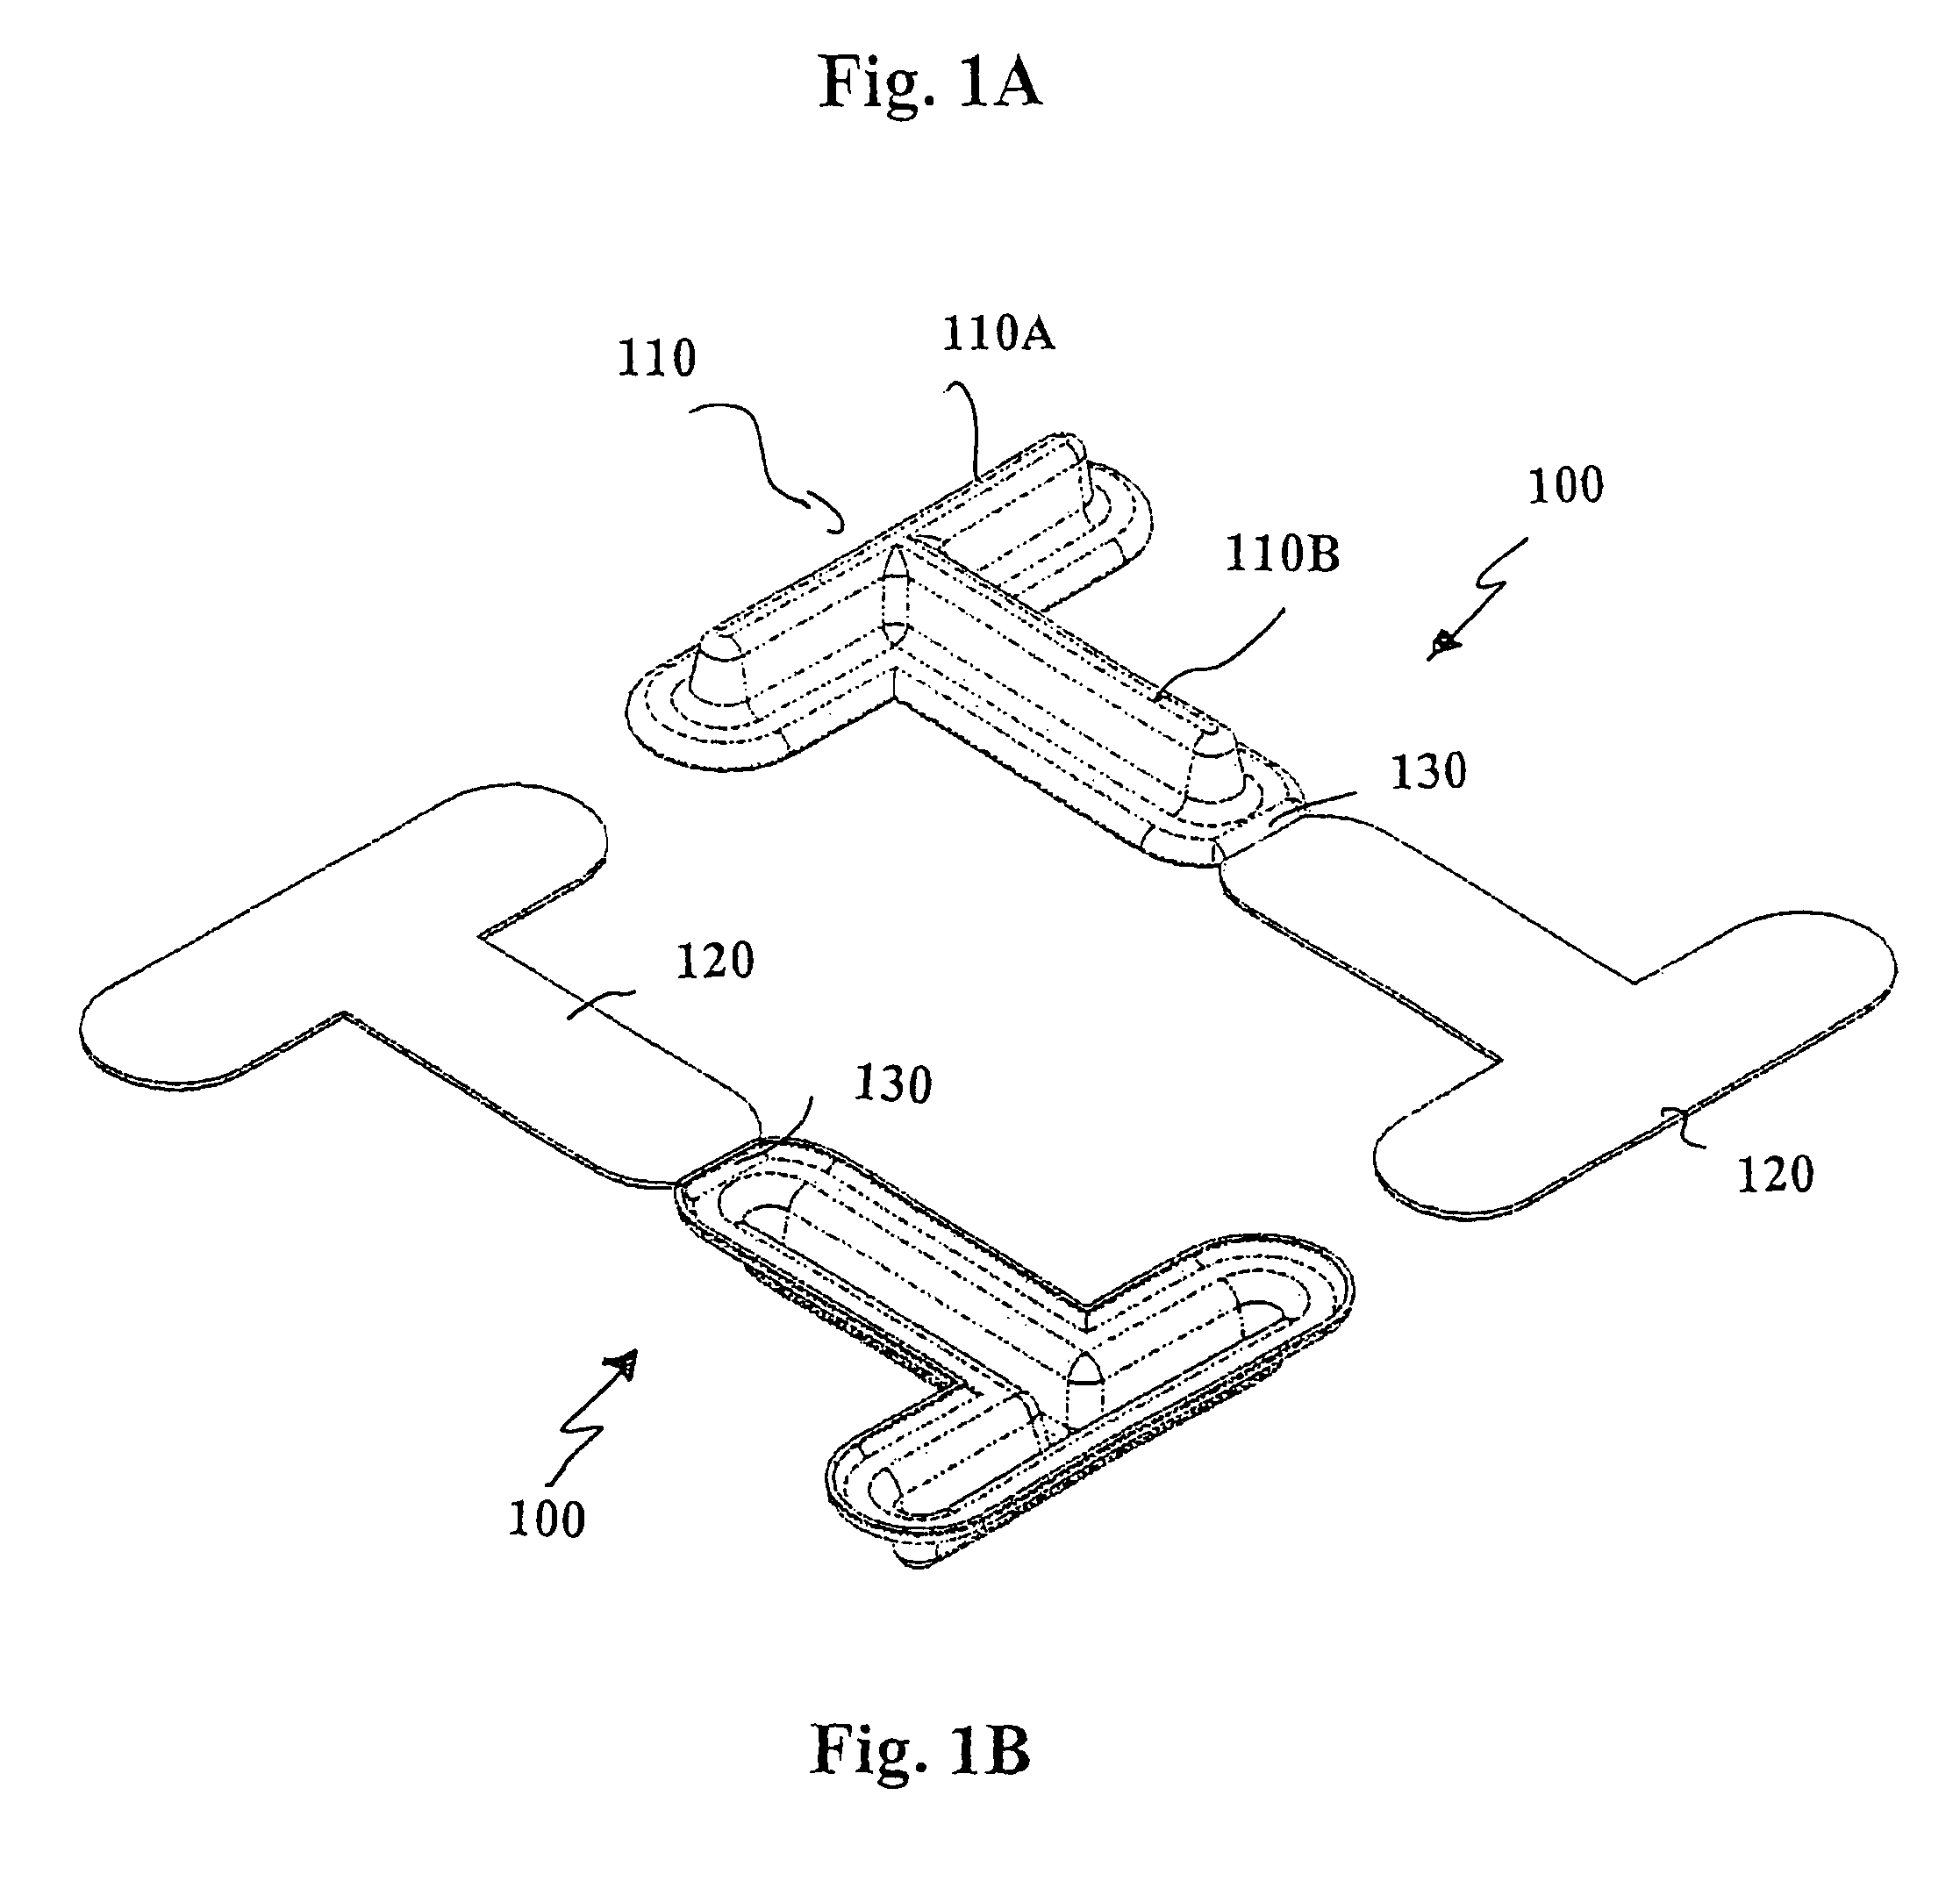 System for tracking a spatial position of an object via a tracking system